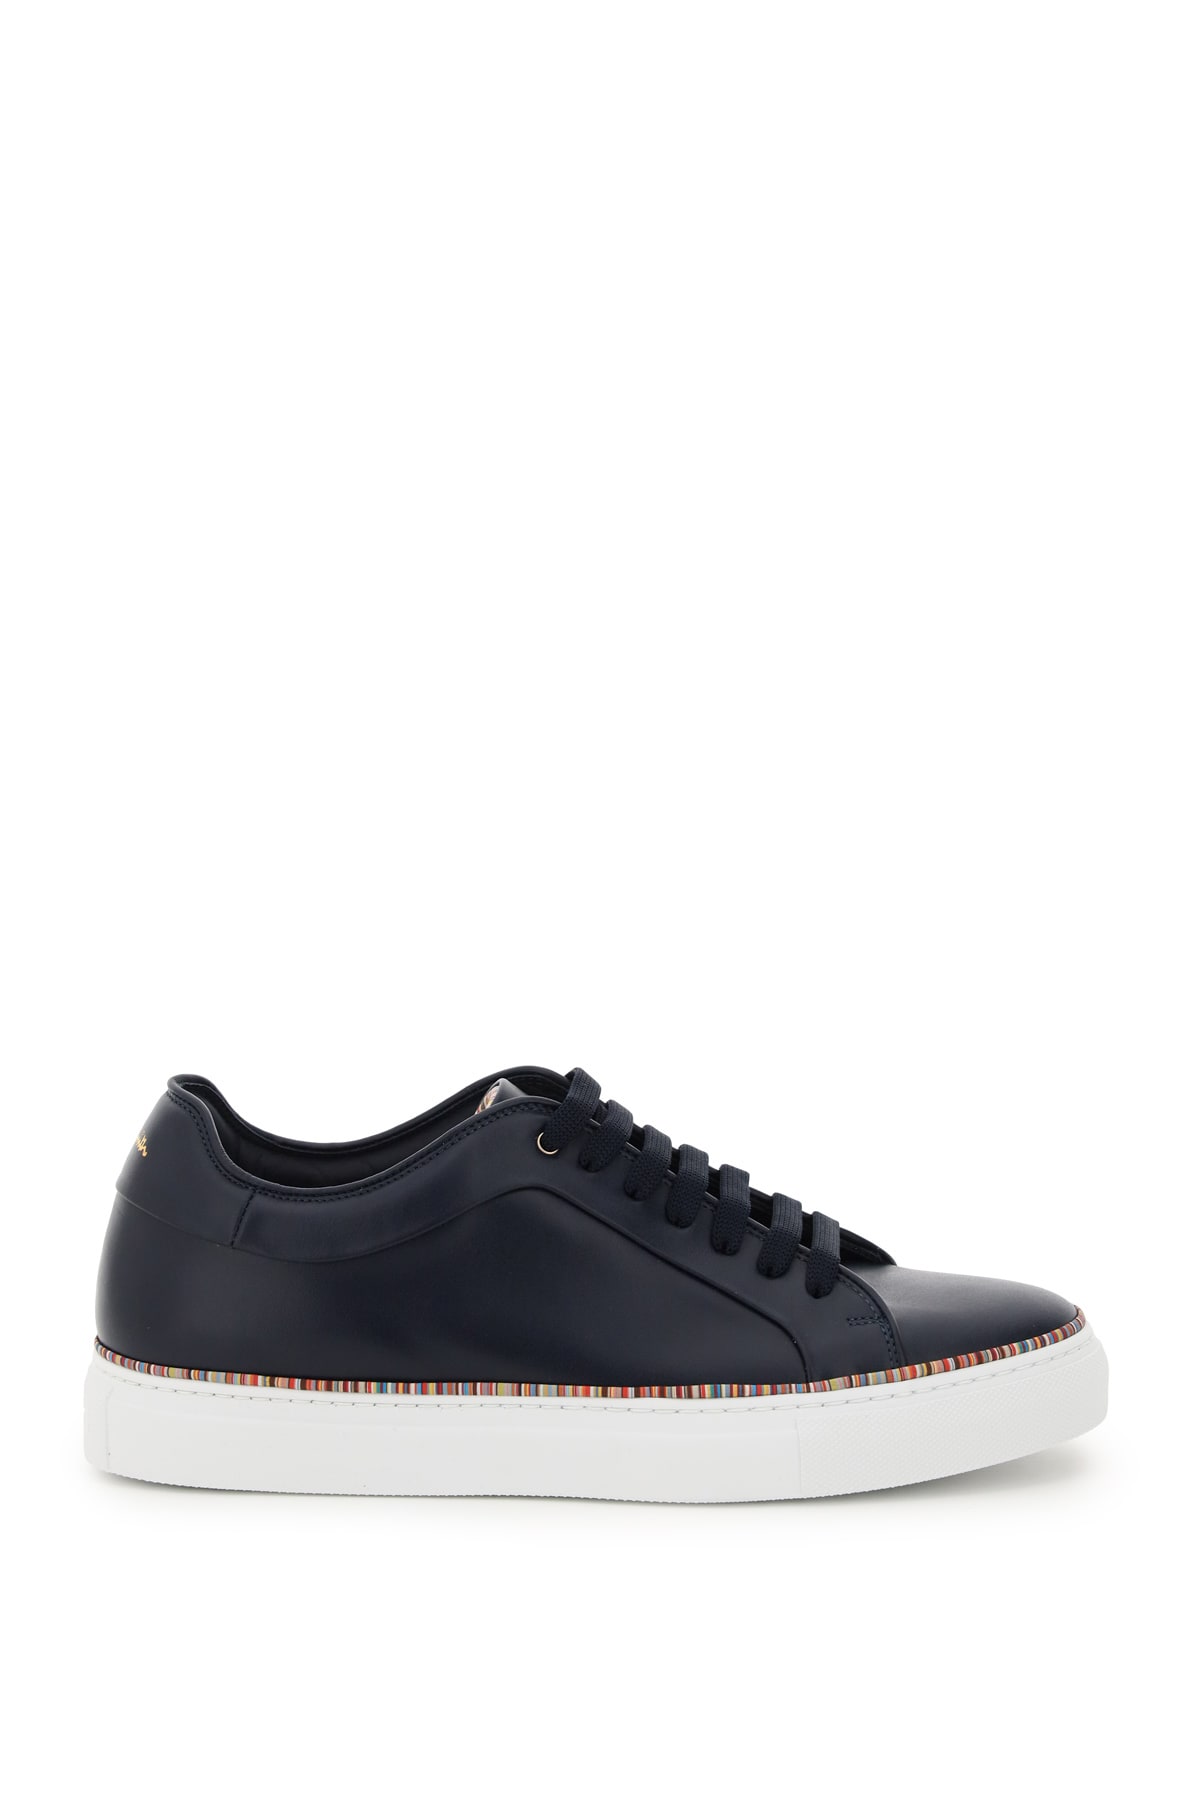 Paul Smith Basso Sneakers With Piping